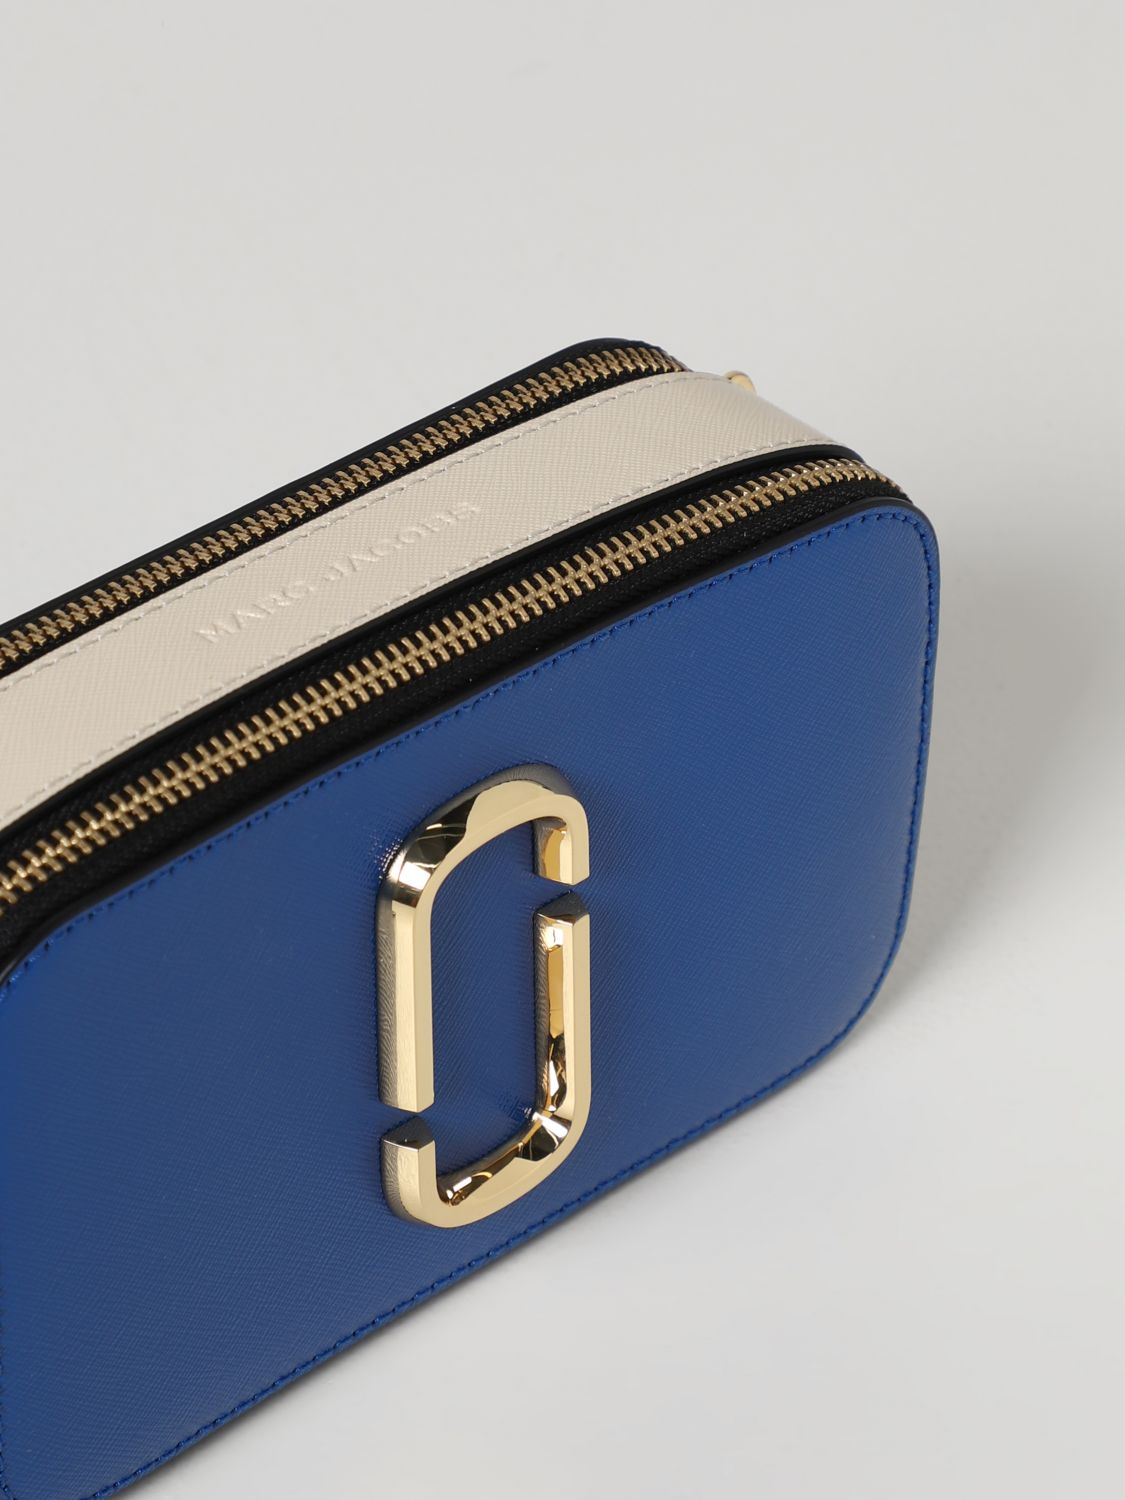 MARC JACOBS: The Americana Snapshot leather bag - Blue  Marc Jacobs mini  bag H175L03FA22 online at